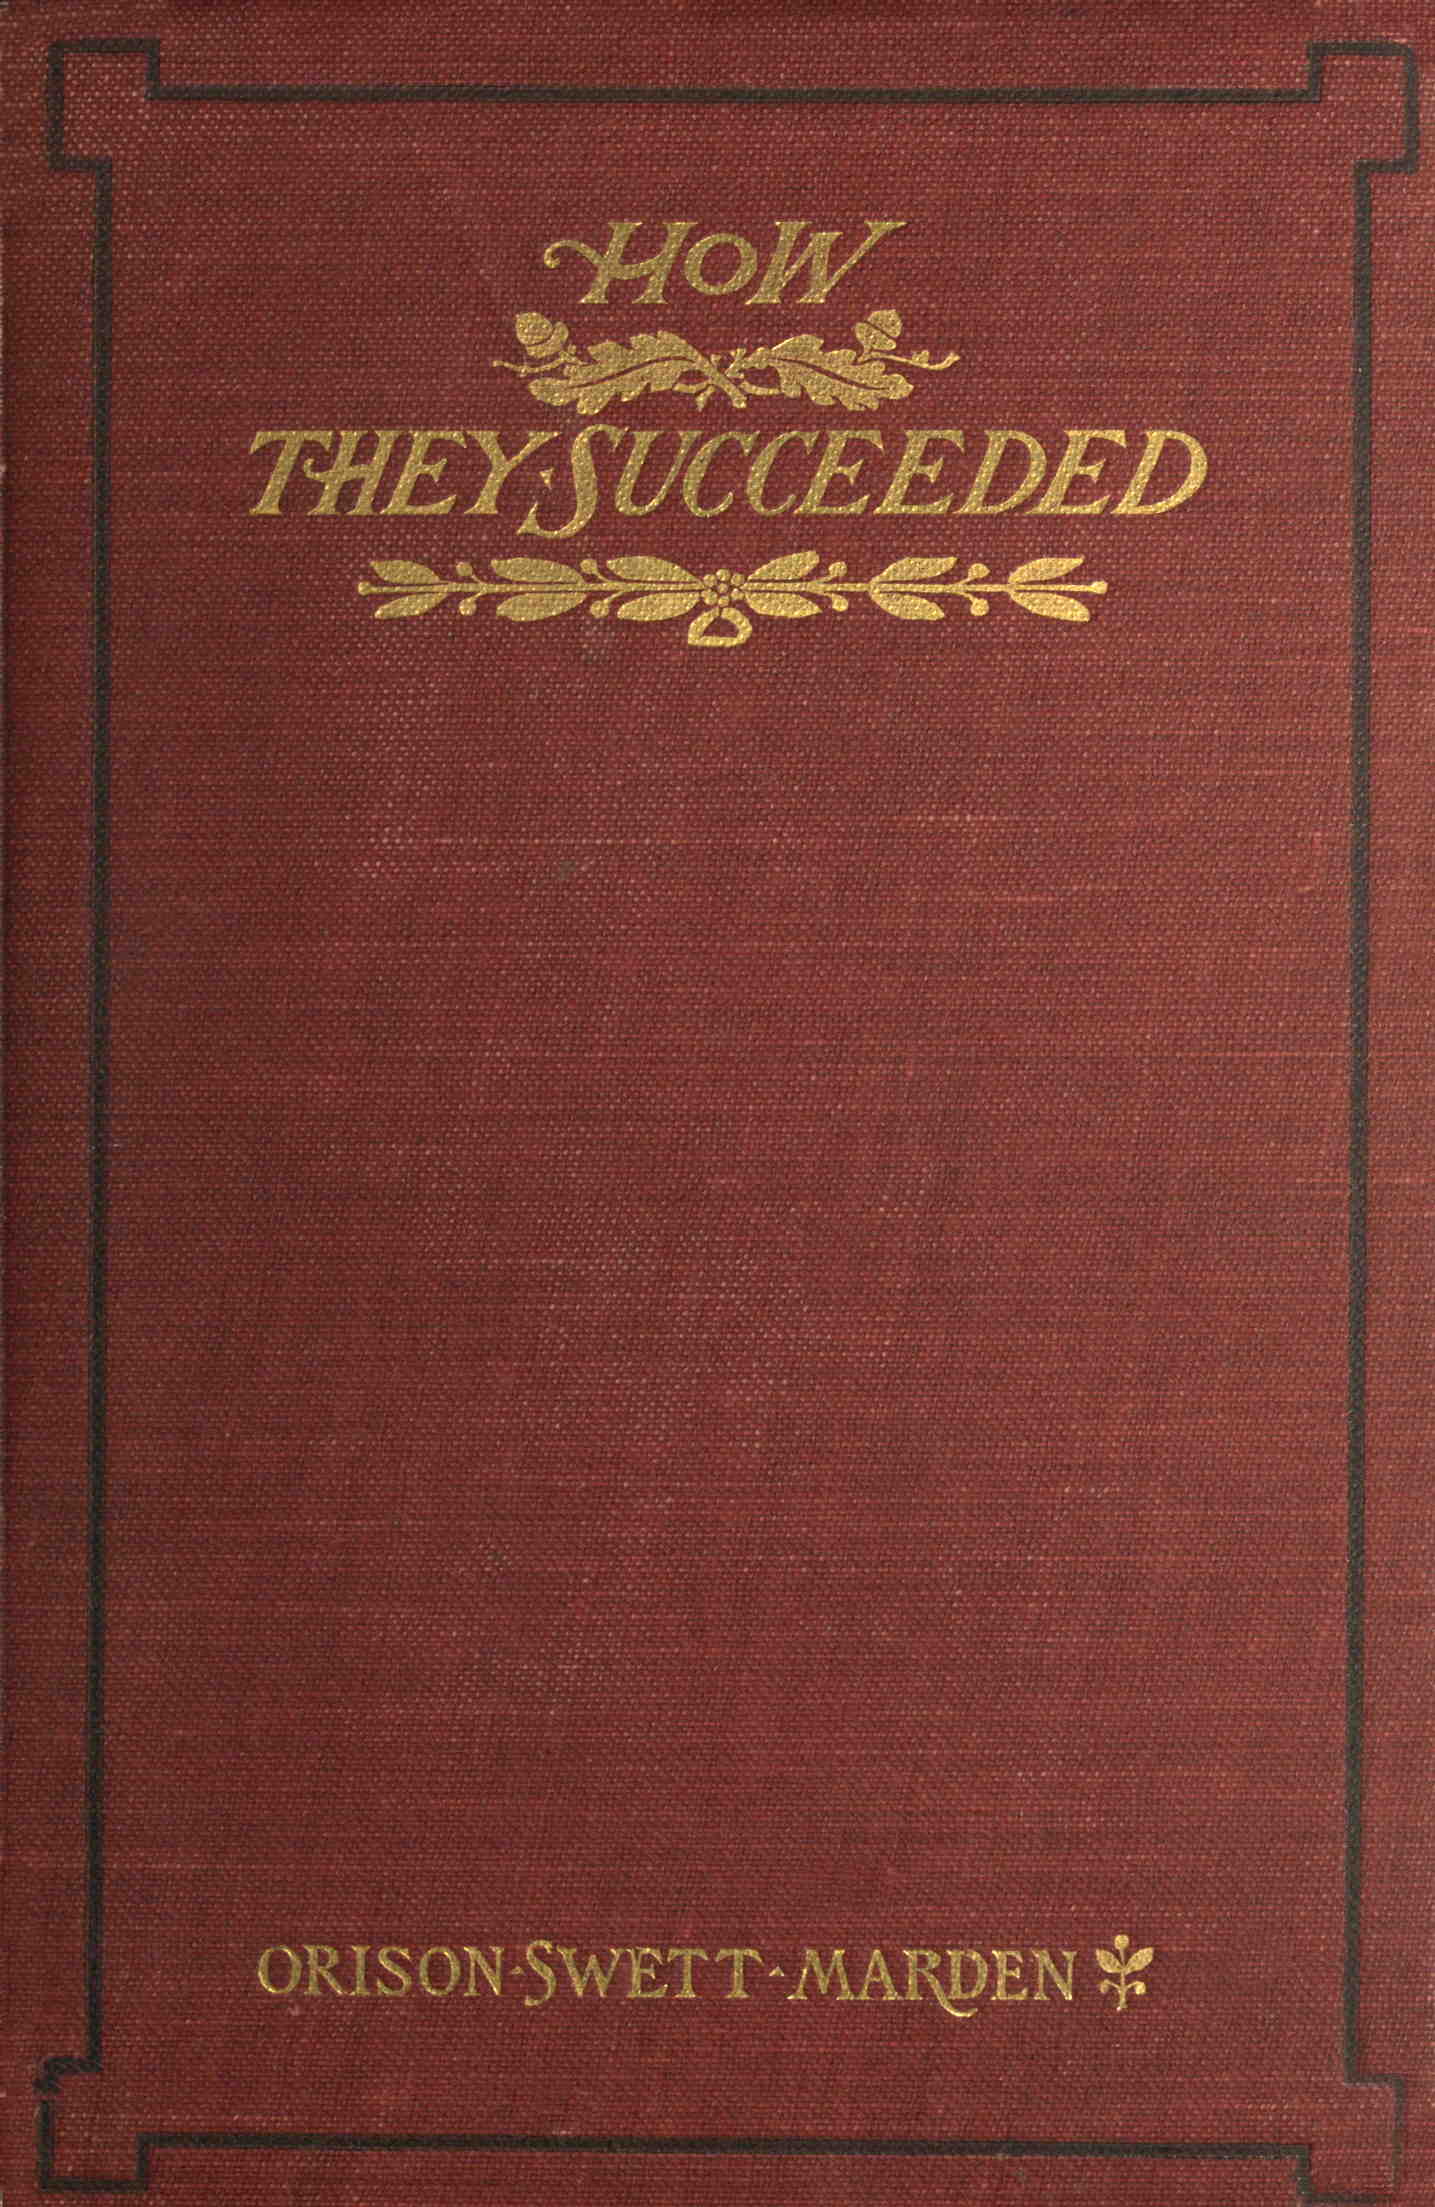 The Project Gutenberg eBook of How They Succeeded, by Orison Swett Marden image